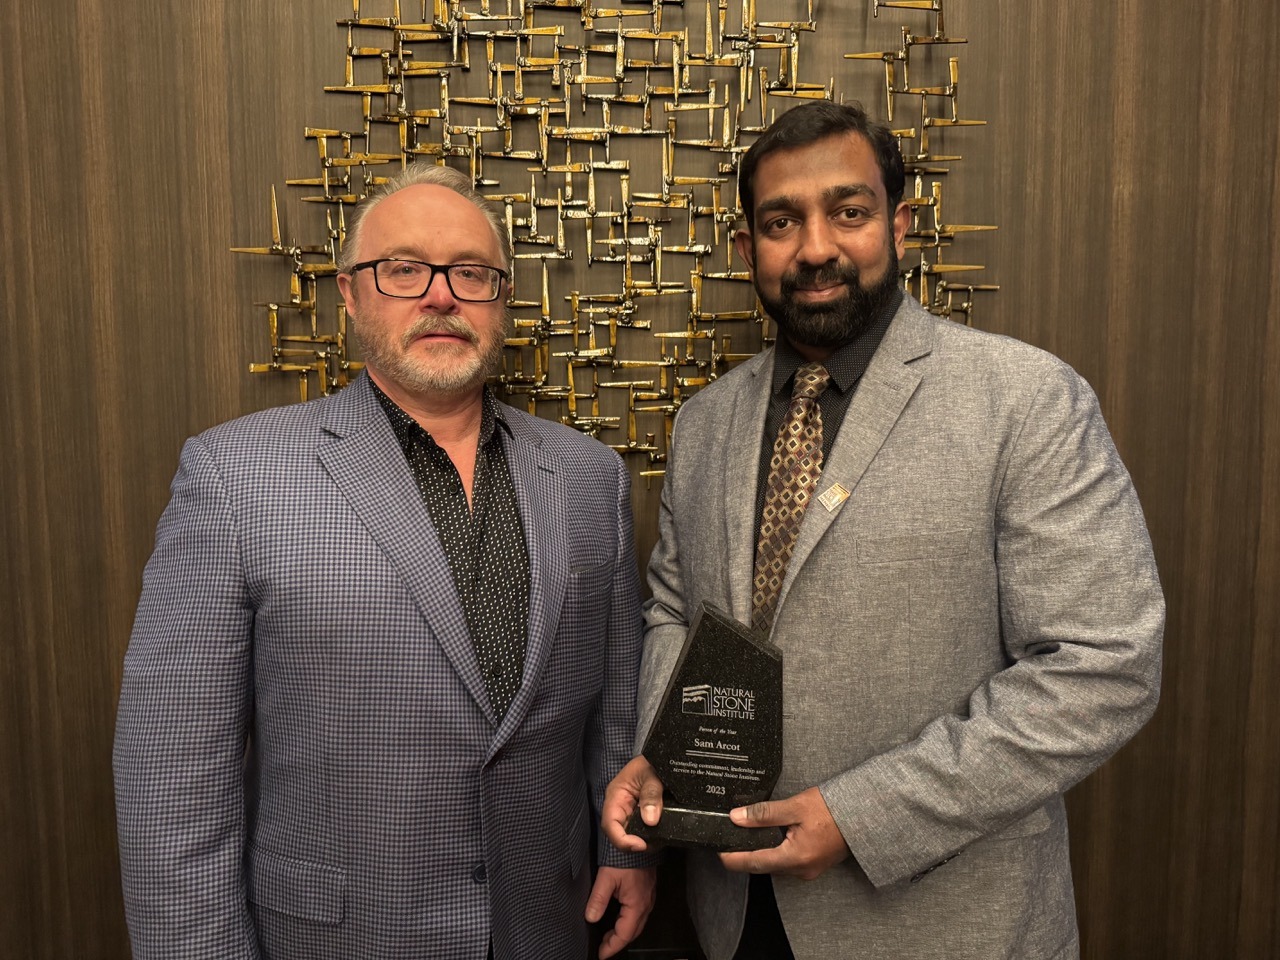 Greg Osterhout Receives 2023 David Fell Spirit of Service Award; Sam Arcot Named Natural Stone Institute Person of the Year